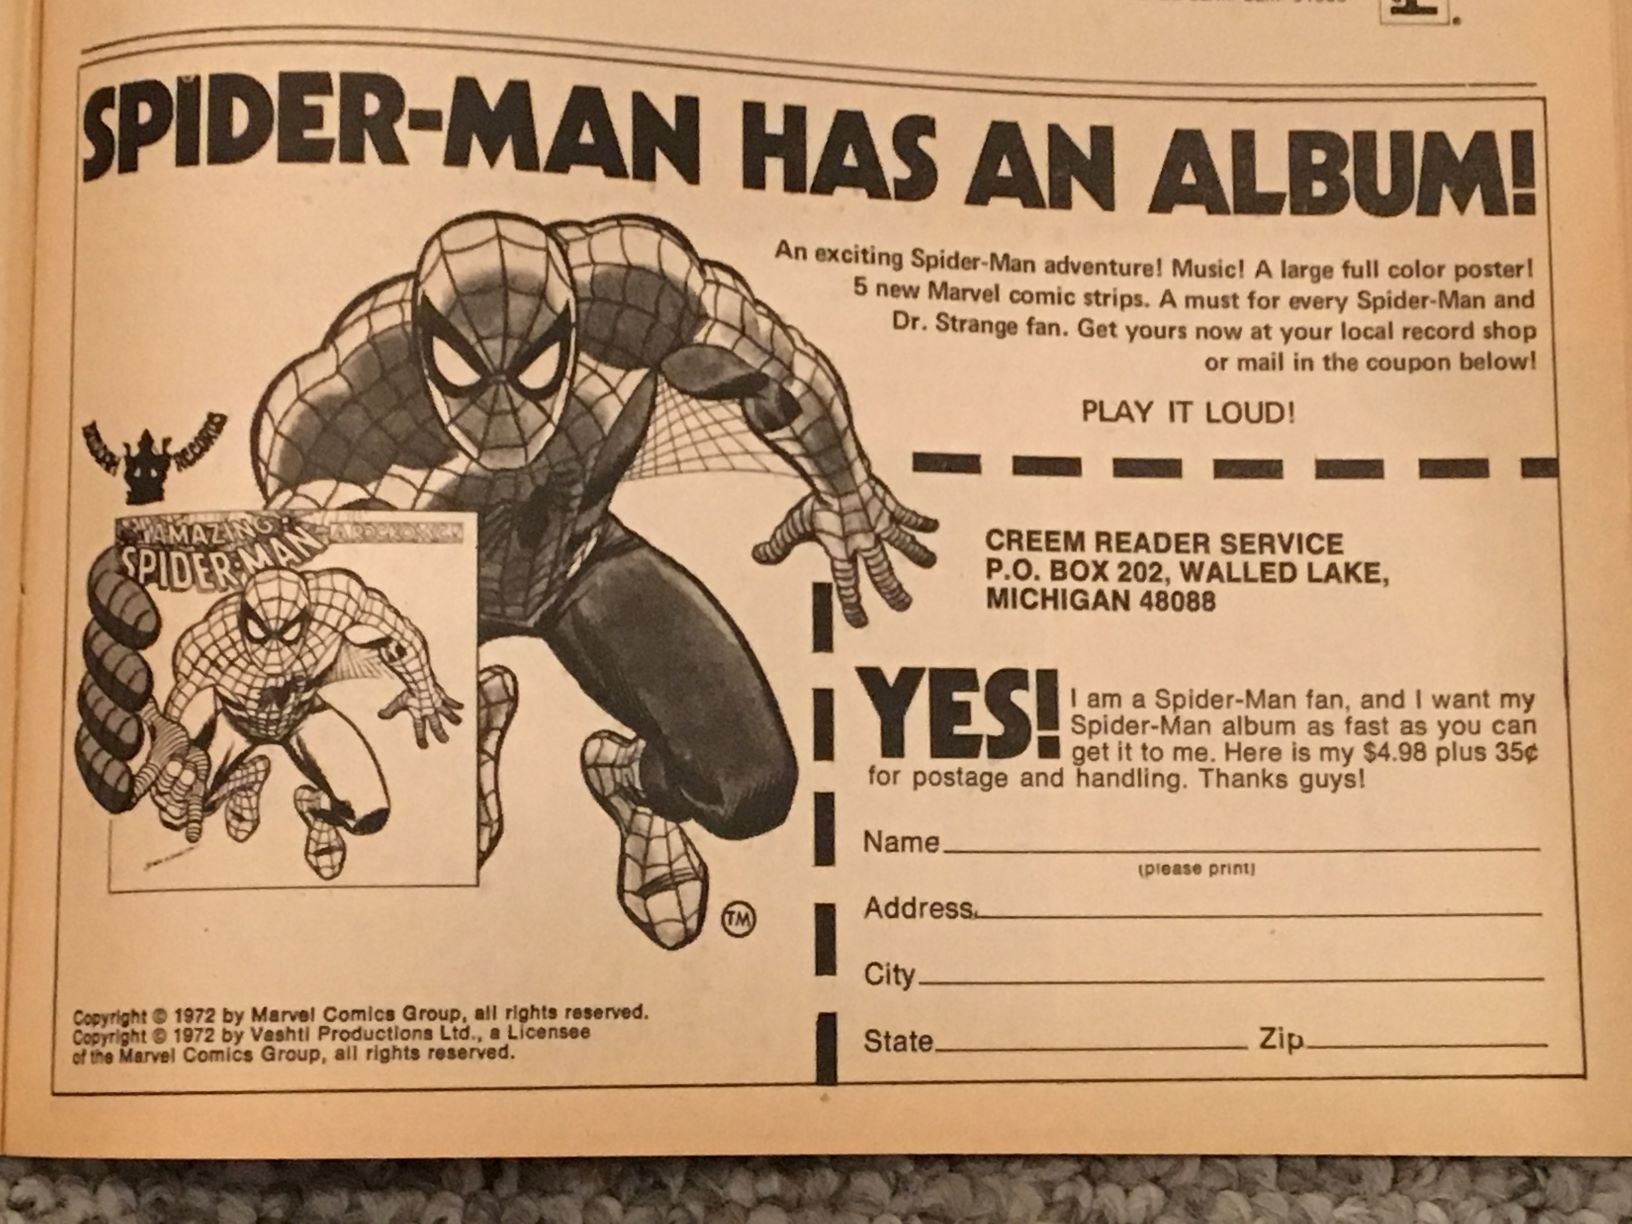 The Amazing Spider-Man Rockomic (Rock Comic): From Beyond the Grave (1972)